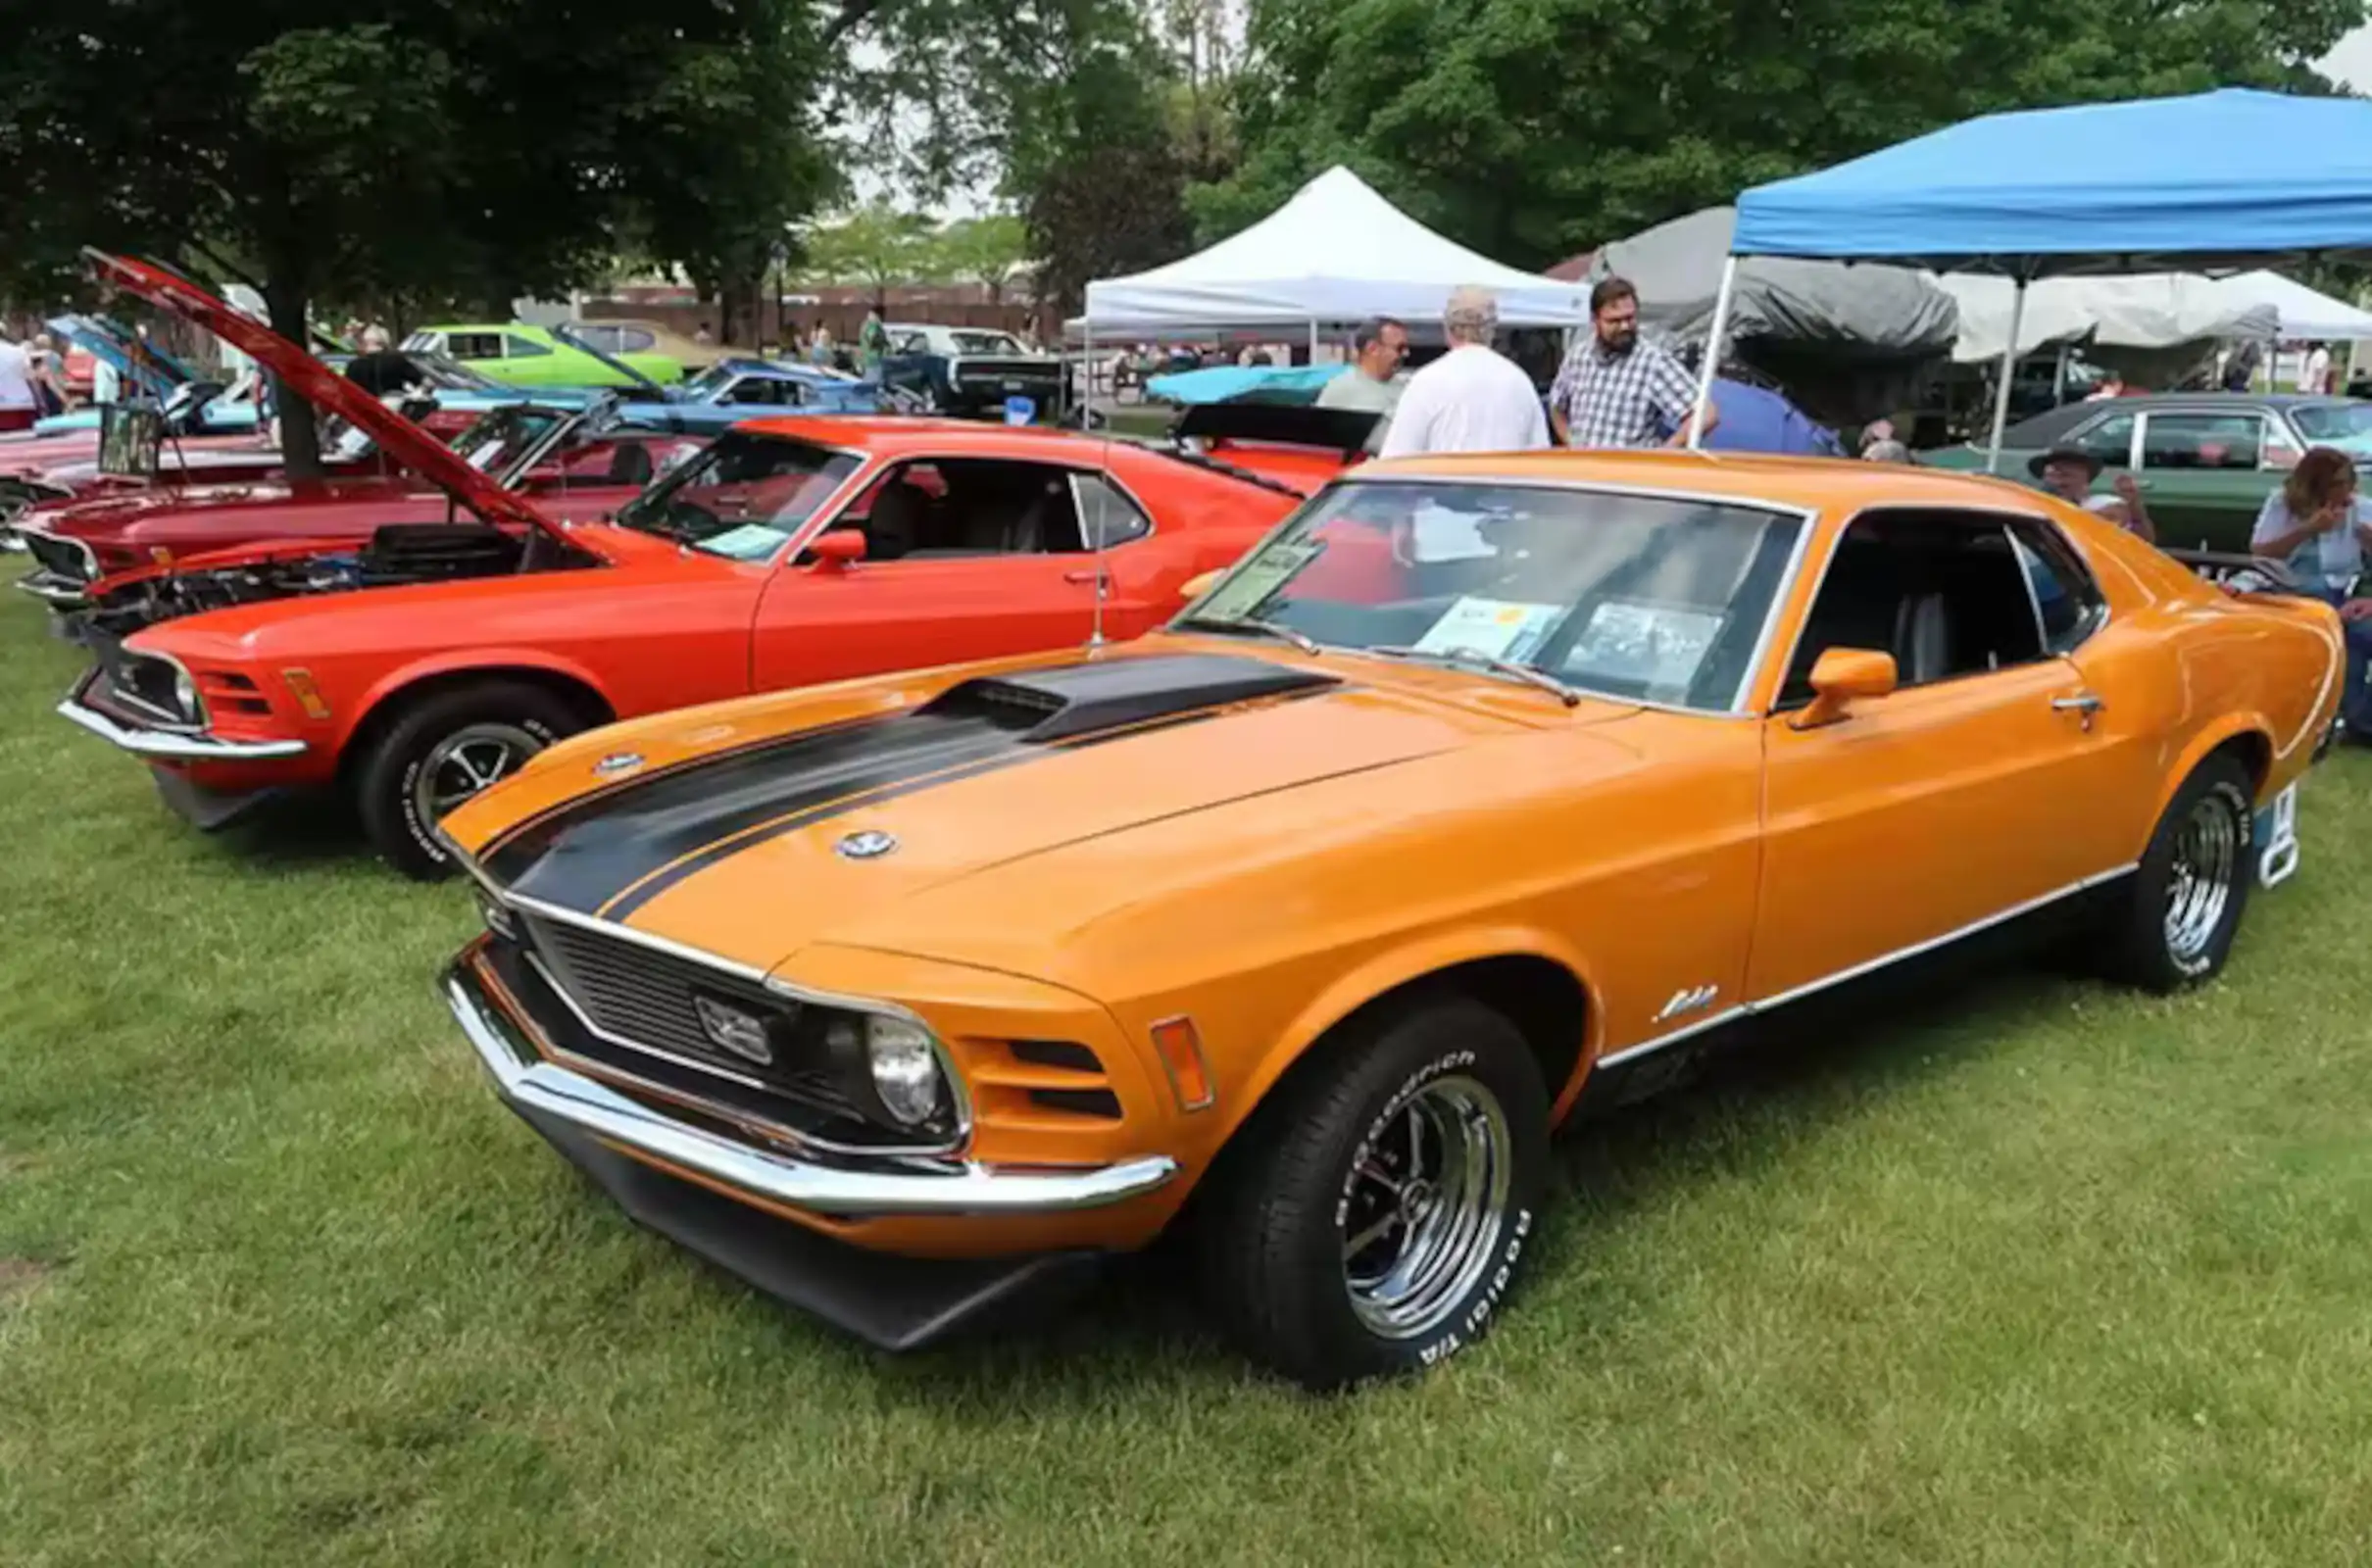 Henry Ford Museum’s ‘Motor Muster’ Show Draws Scores Of Classic Fords